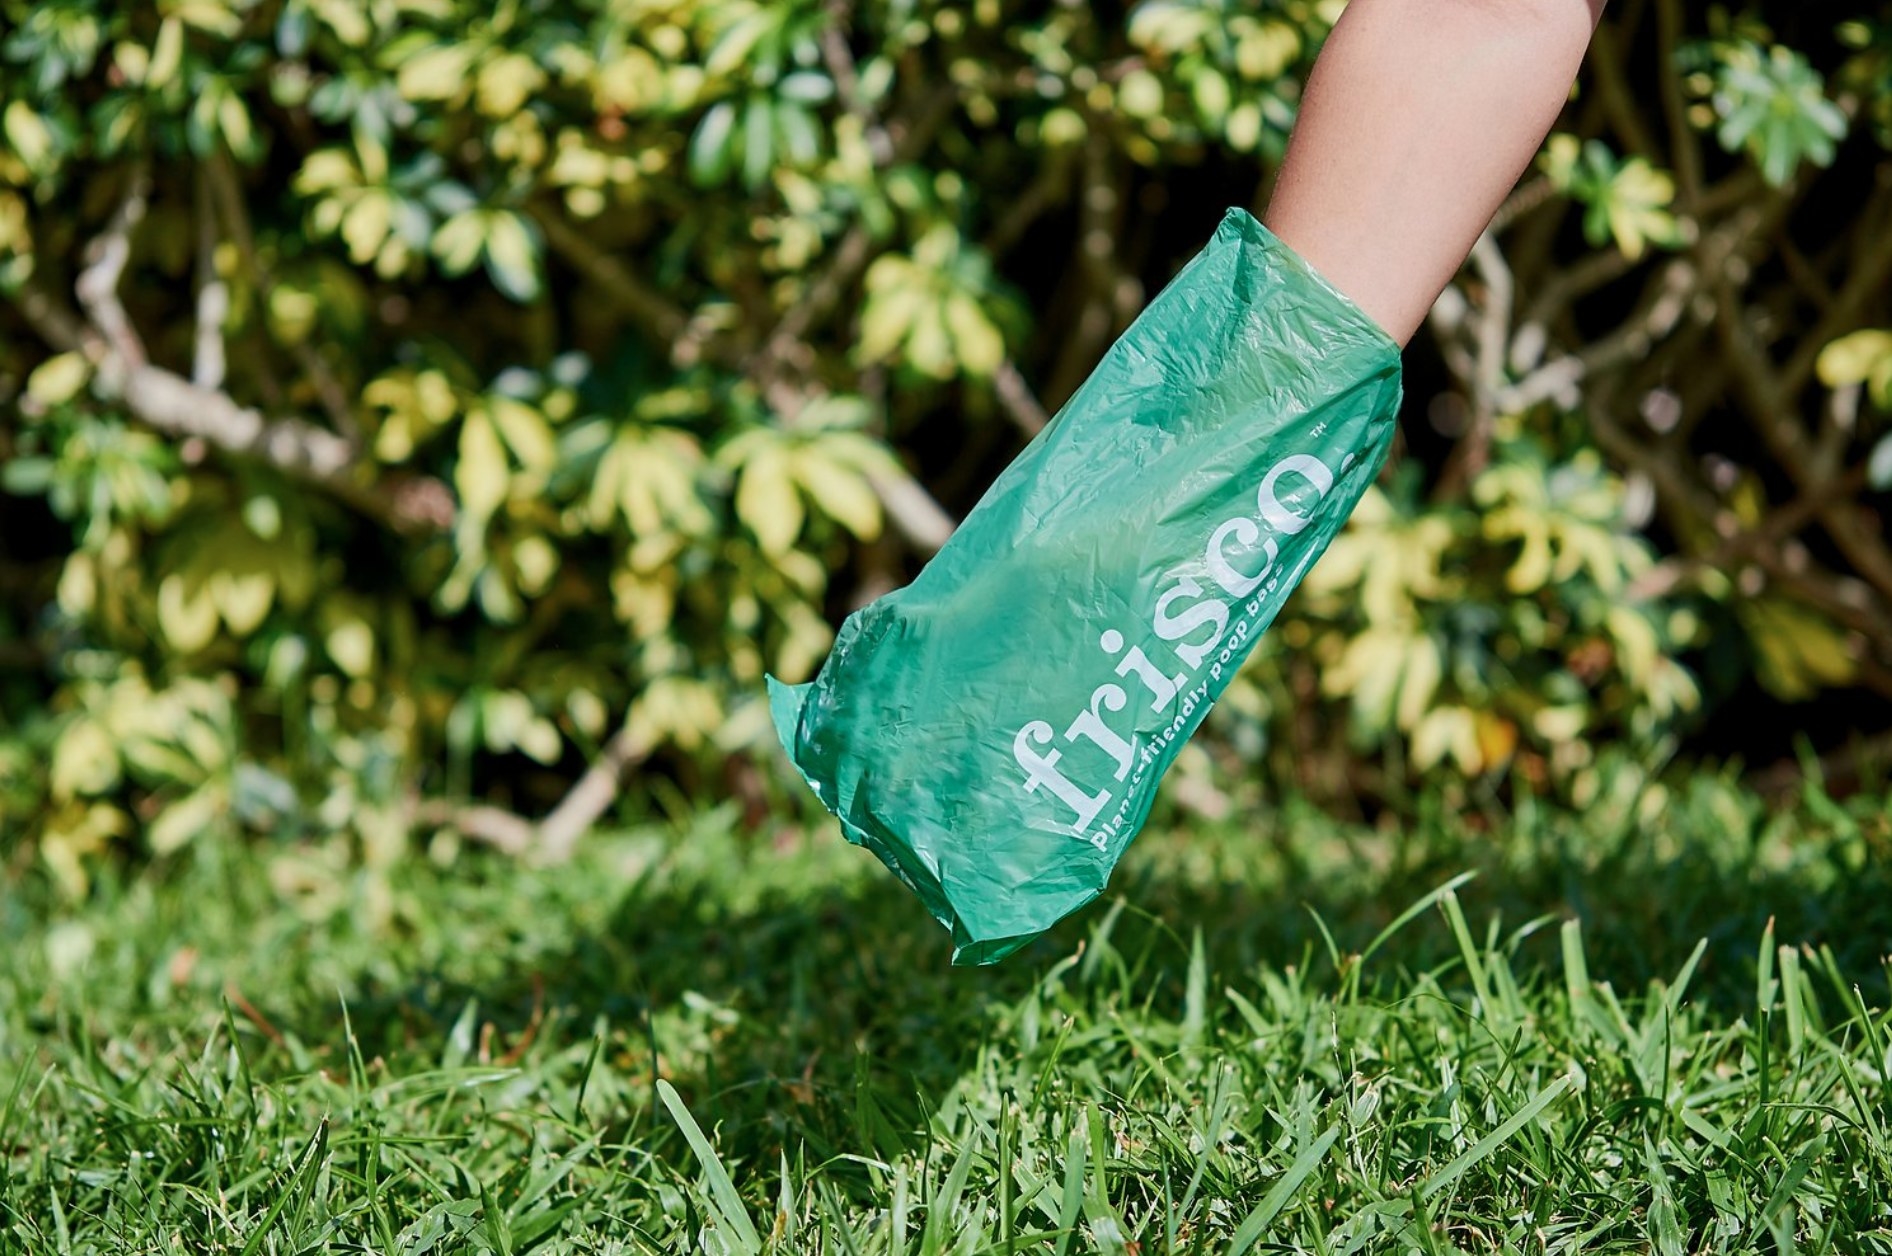 one of the dog poop bags in green